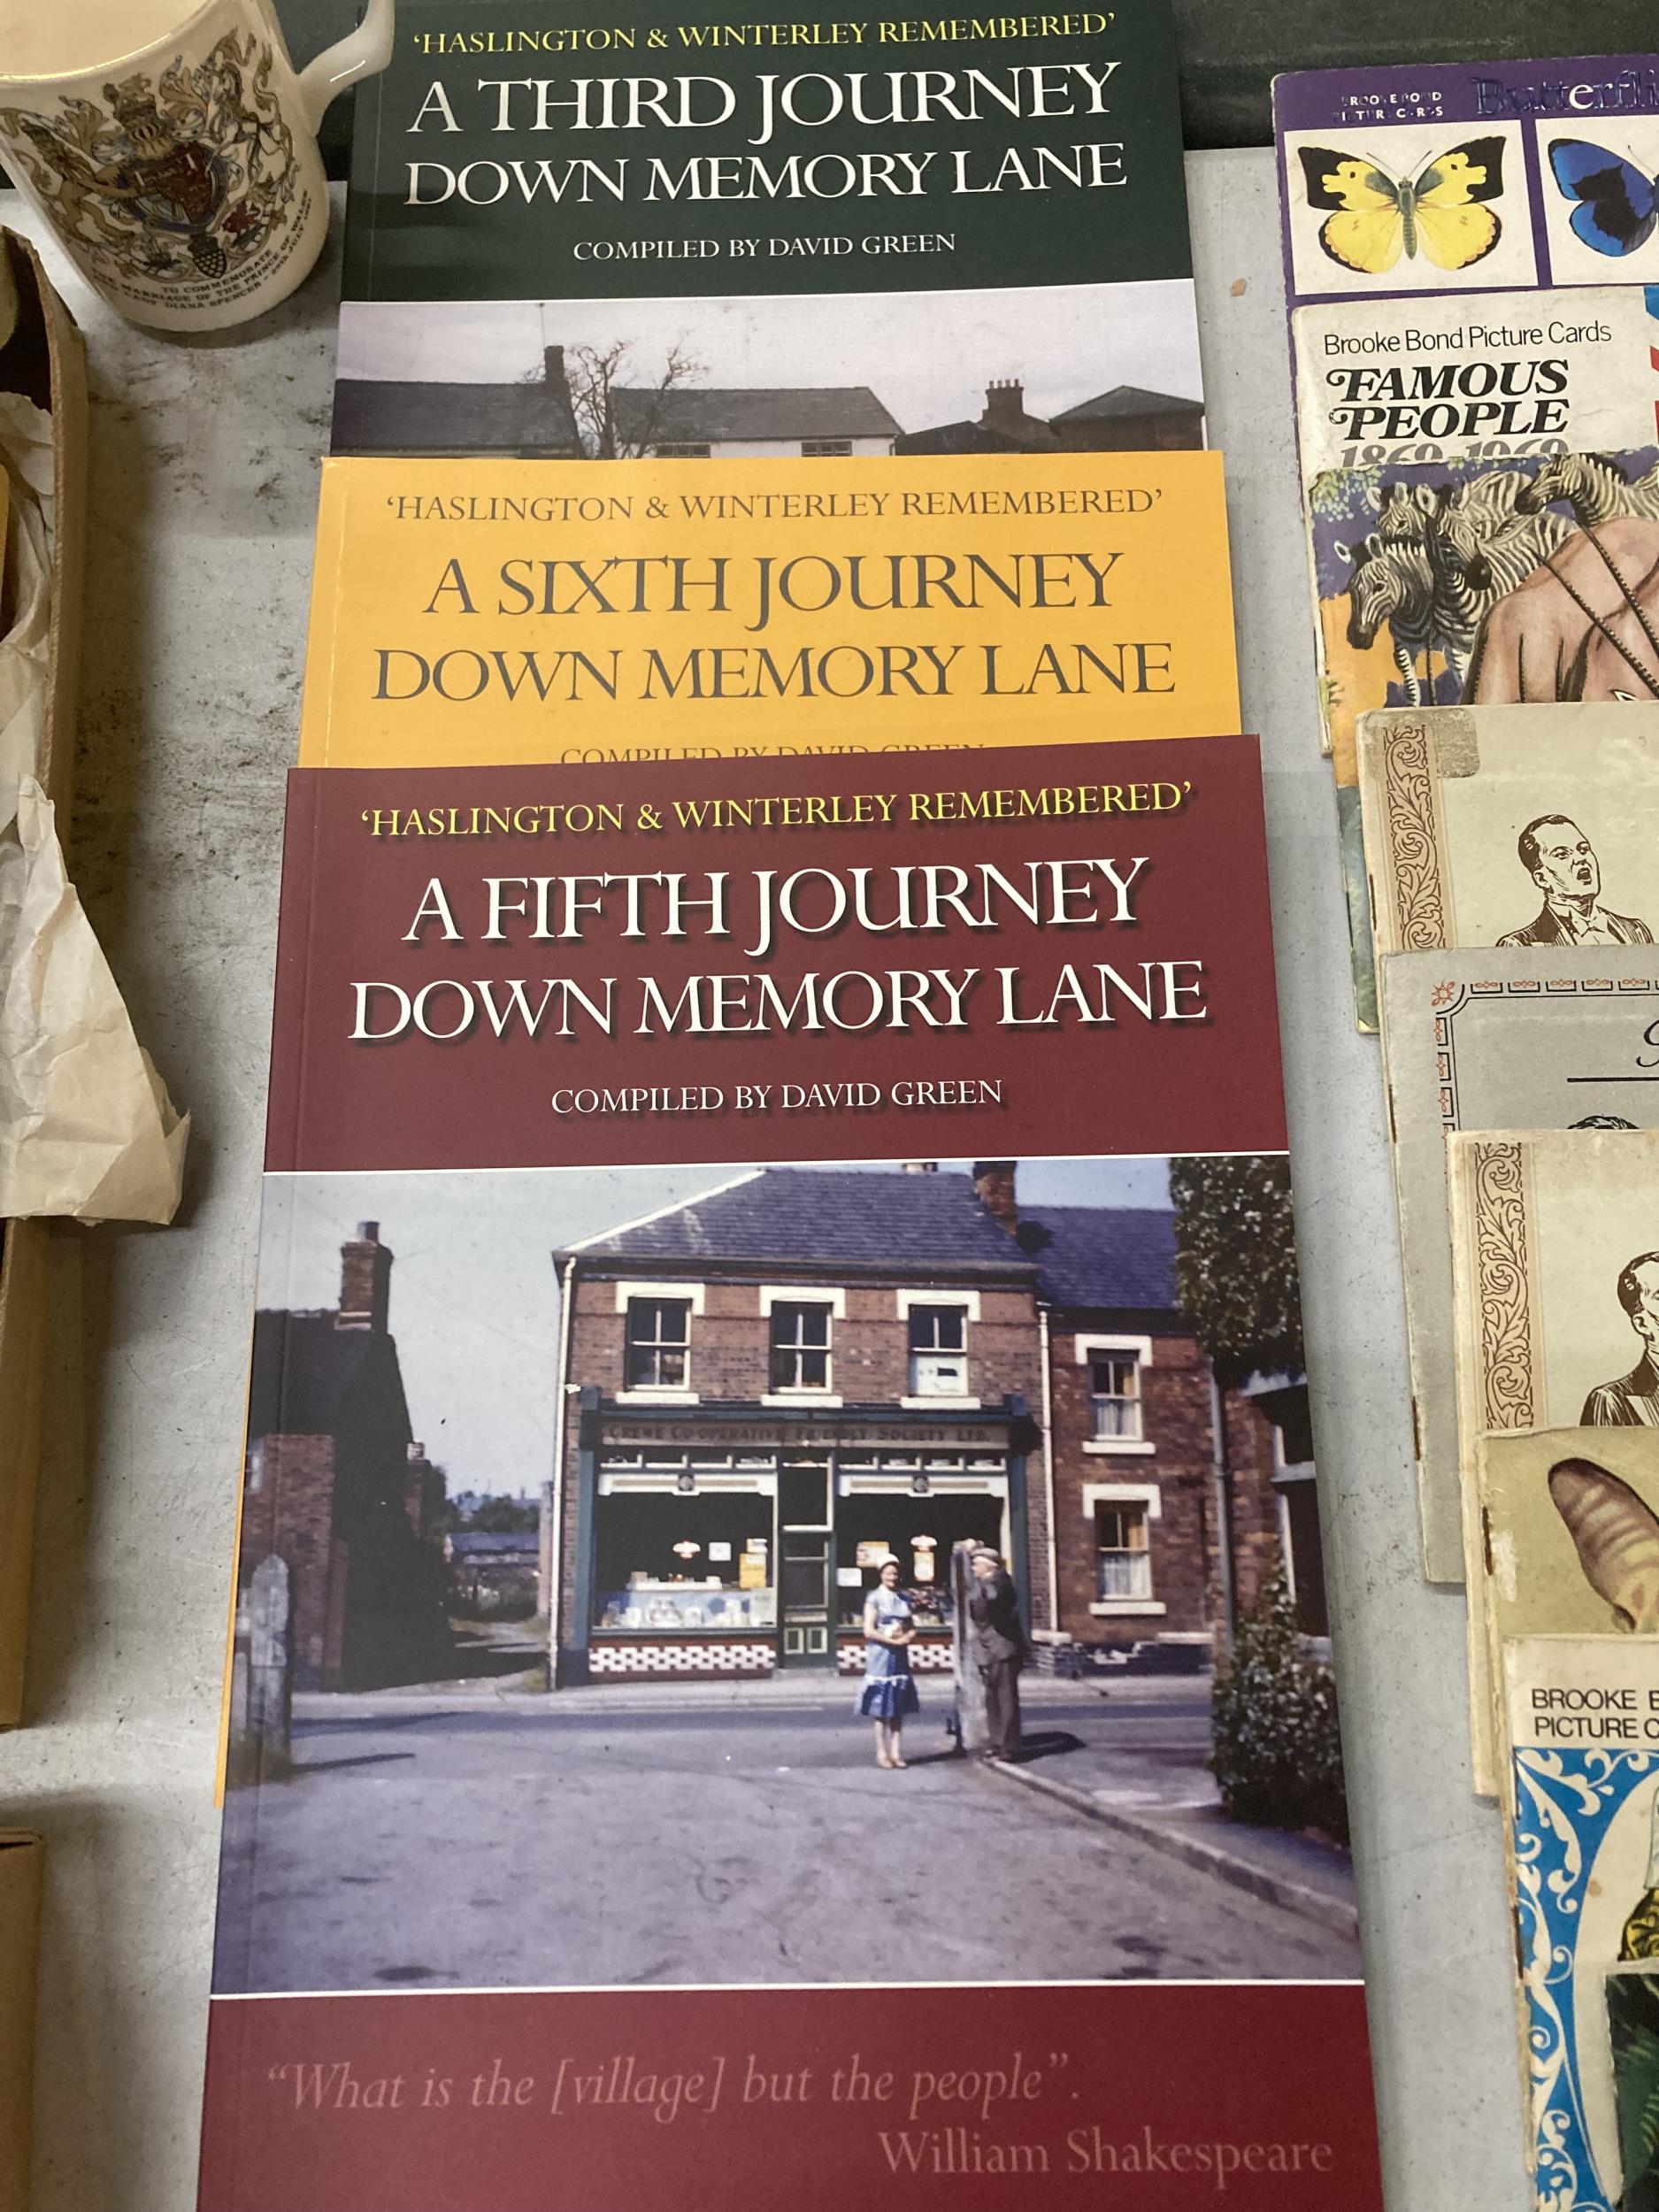 FIVE VOLUMES OF HASLINGTON & WINTERLEY REMEMBERED - A JOURNEY DOWN MEMORY LANE COMPILED BY DAVID